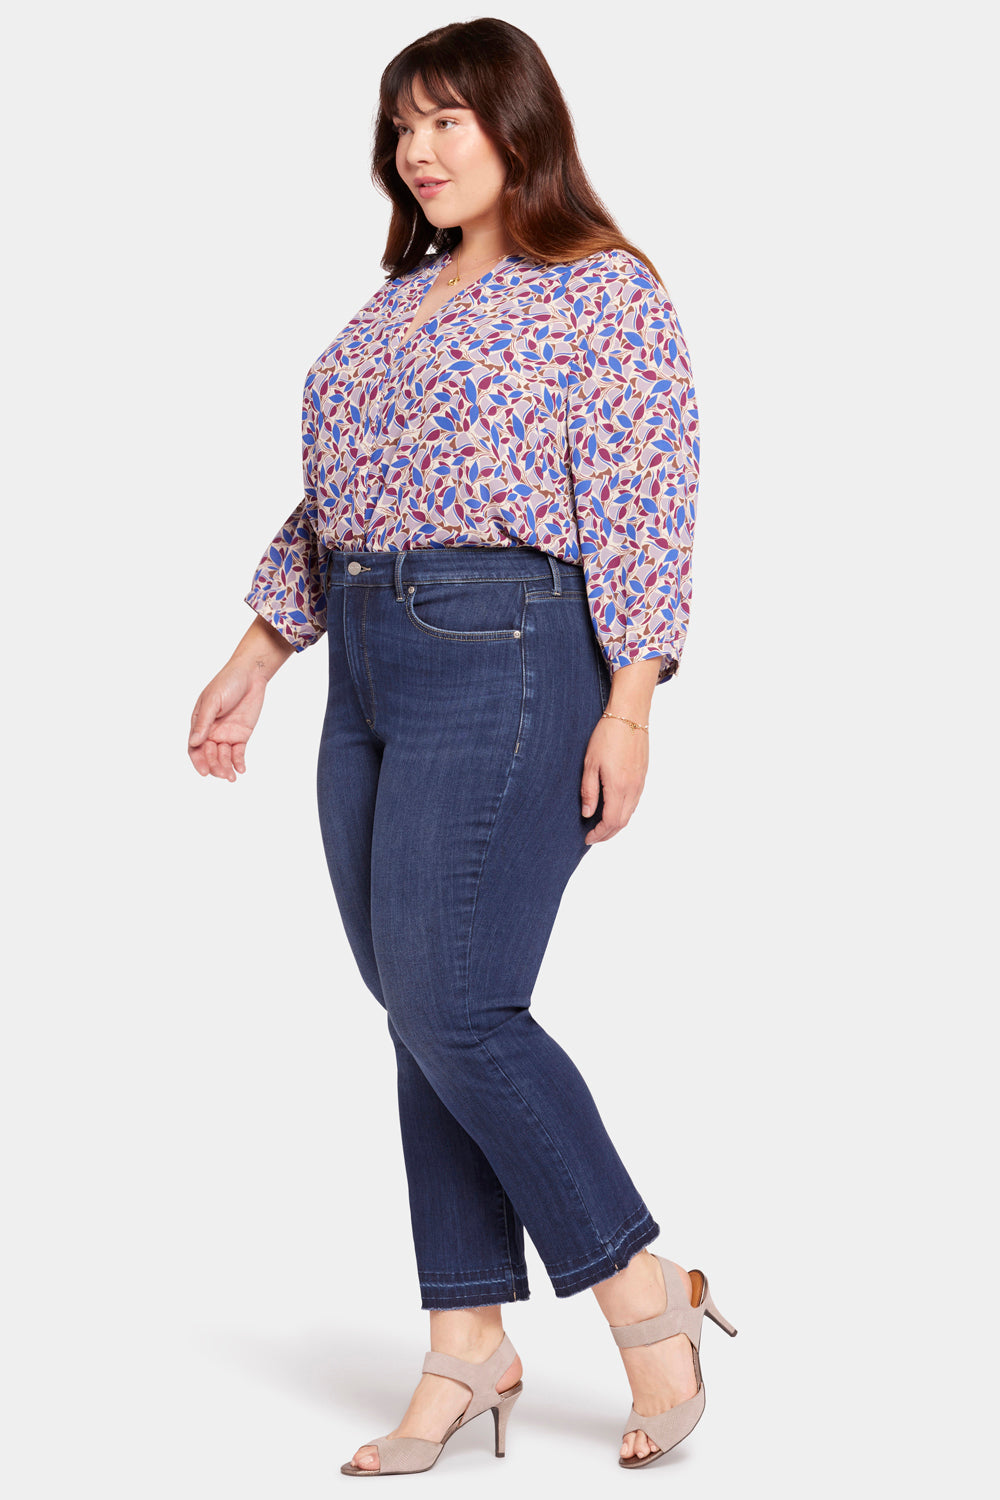 NYDJ Marilyn Straight Ankle Jeans In Plus Size In Sure Stretch® Denim With High Rise And Released Hems - Wonderland